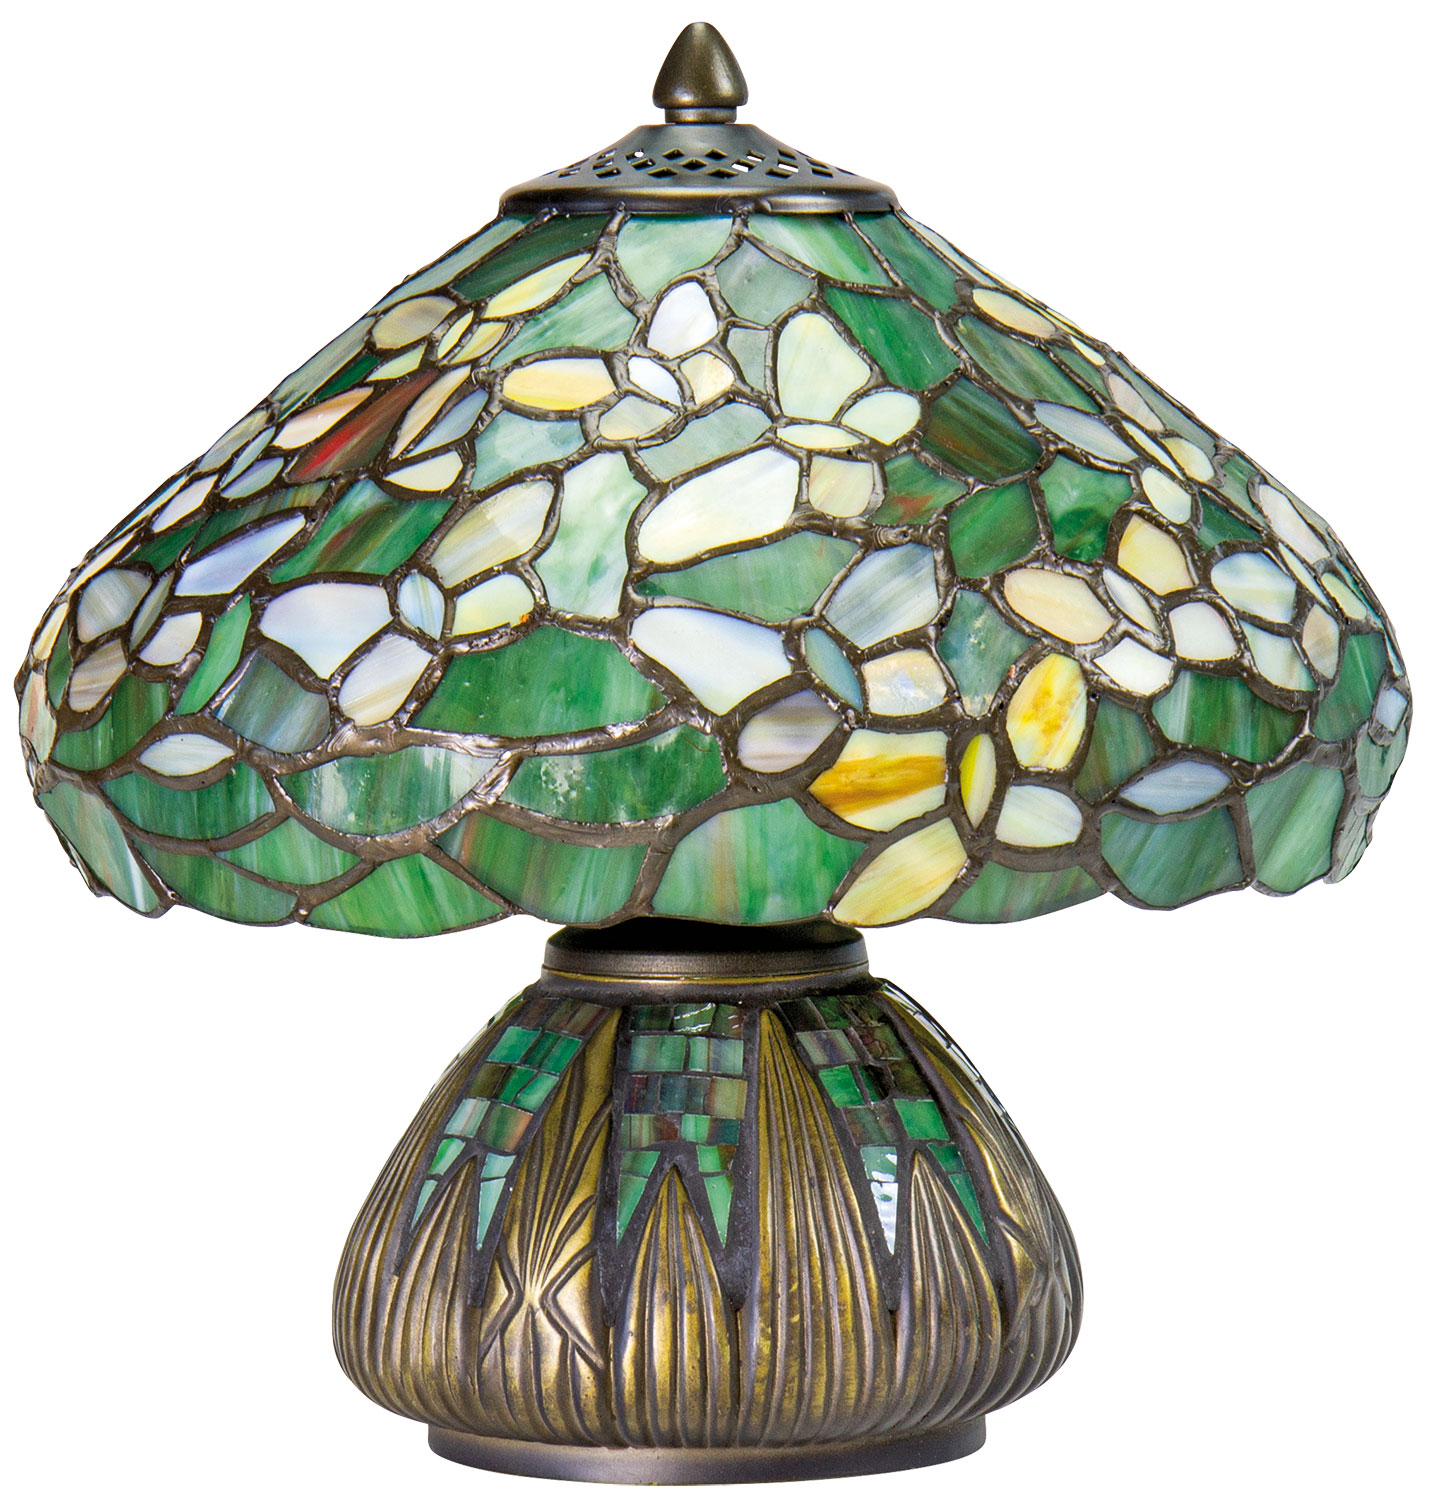 Table lamp "Butterfly" - after Louis C. Tiffany